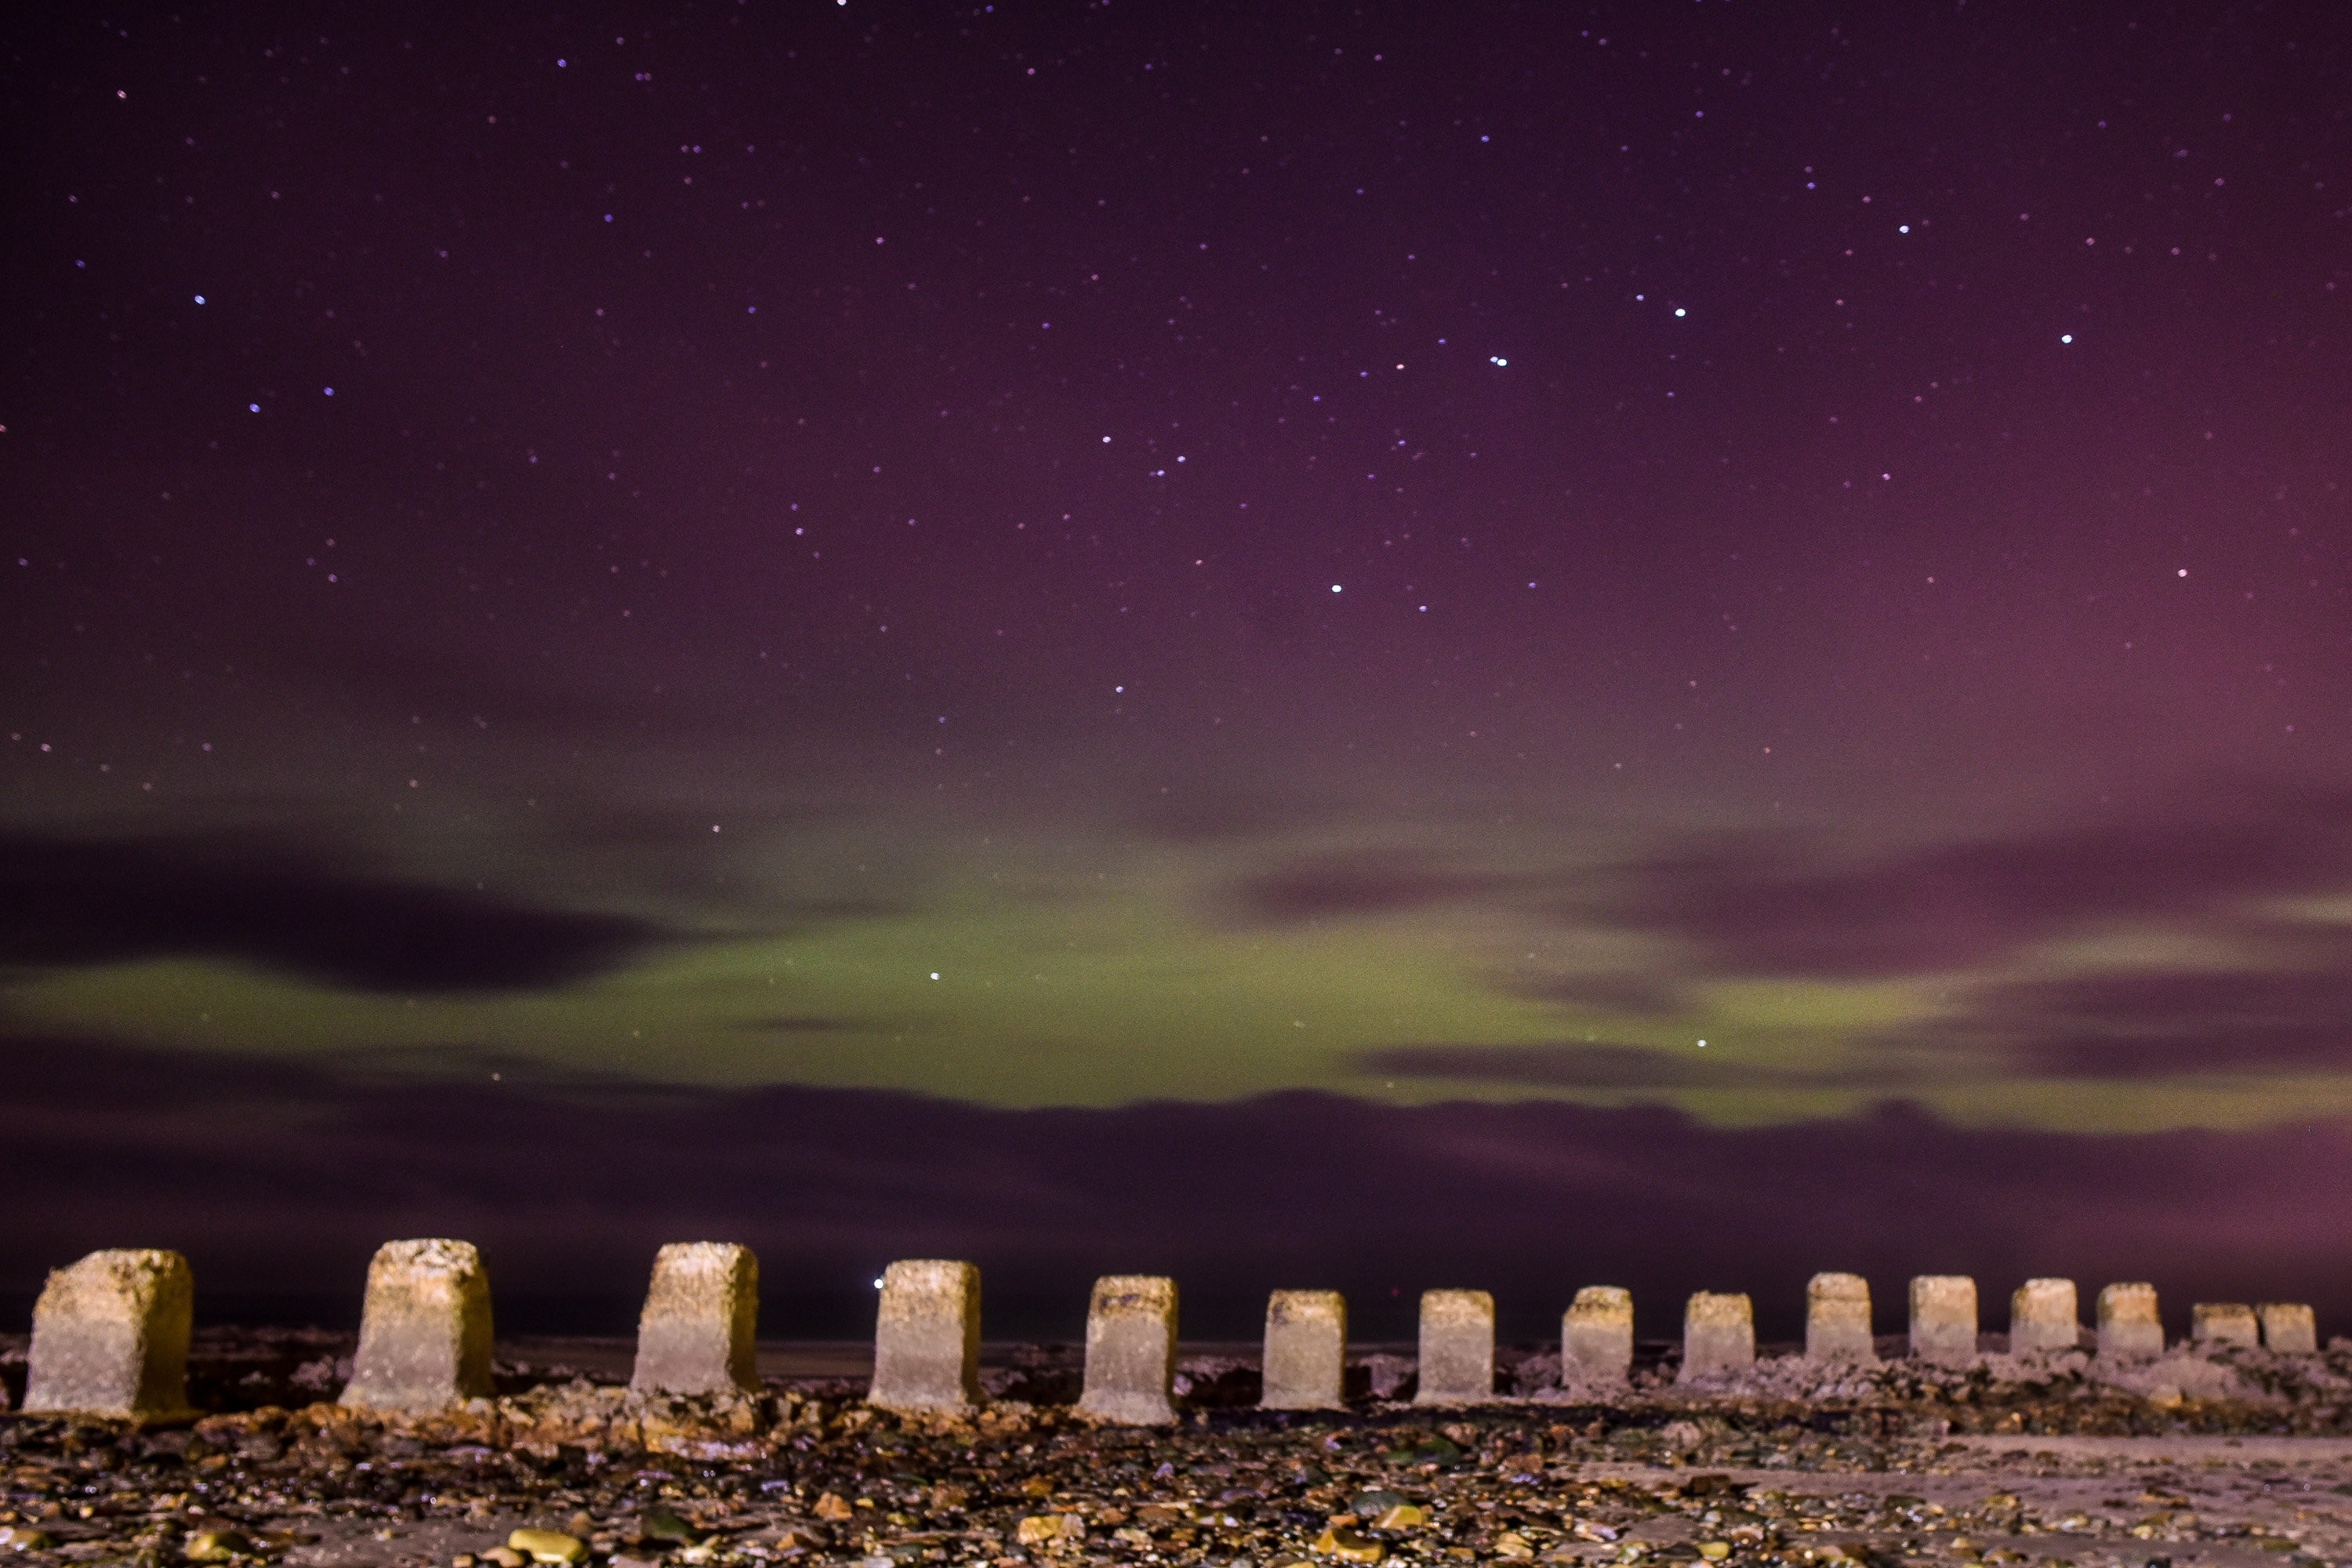 The Northern Lights, Aurora Borealis, are seen over the West Beach in Lossiemouth, Moray on December 14 2015.